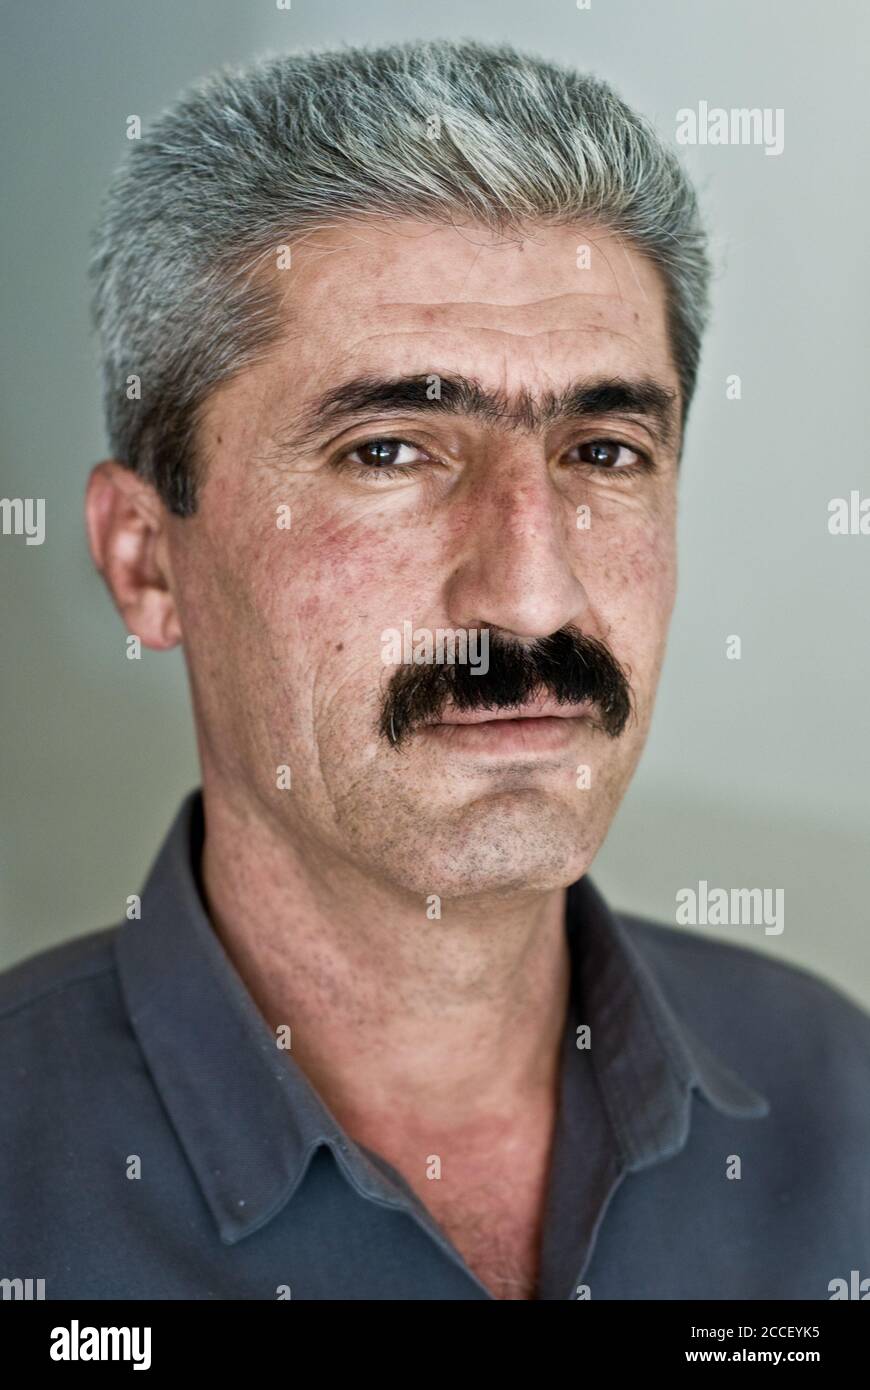 A portrait of a middle aged Kurdish man in traditional garb from the town of Shaqlawa, in the Kurdistan Autonomous Region of Northern Iraq. Stock Photo